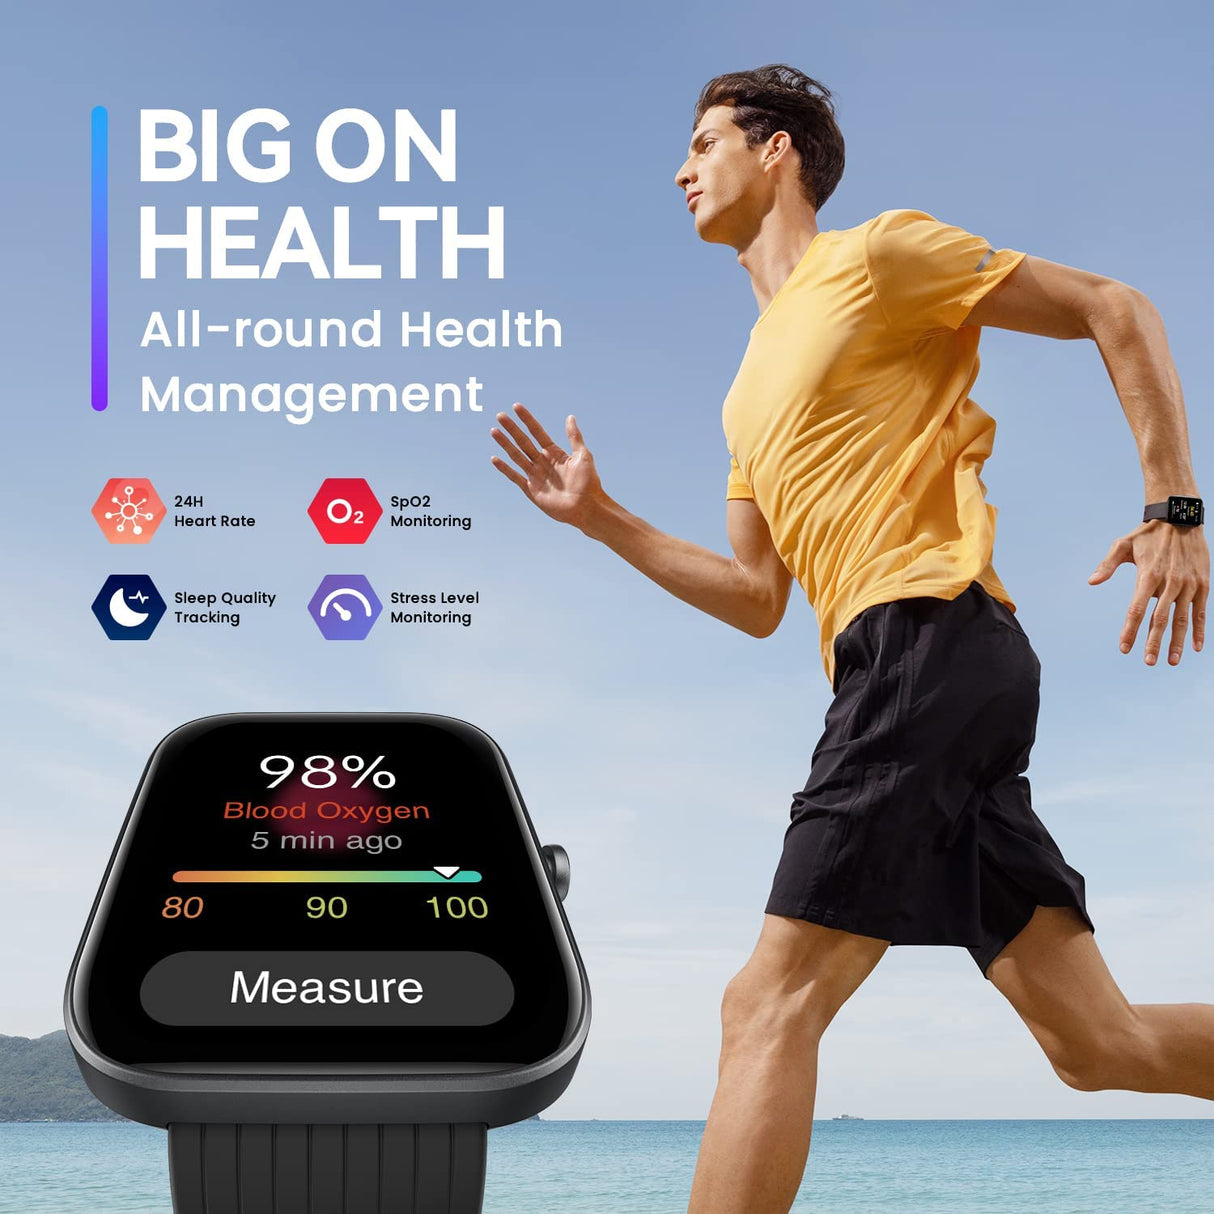 Amazfit Bip 3 Smart Watch for Android iPhone